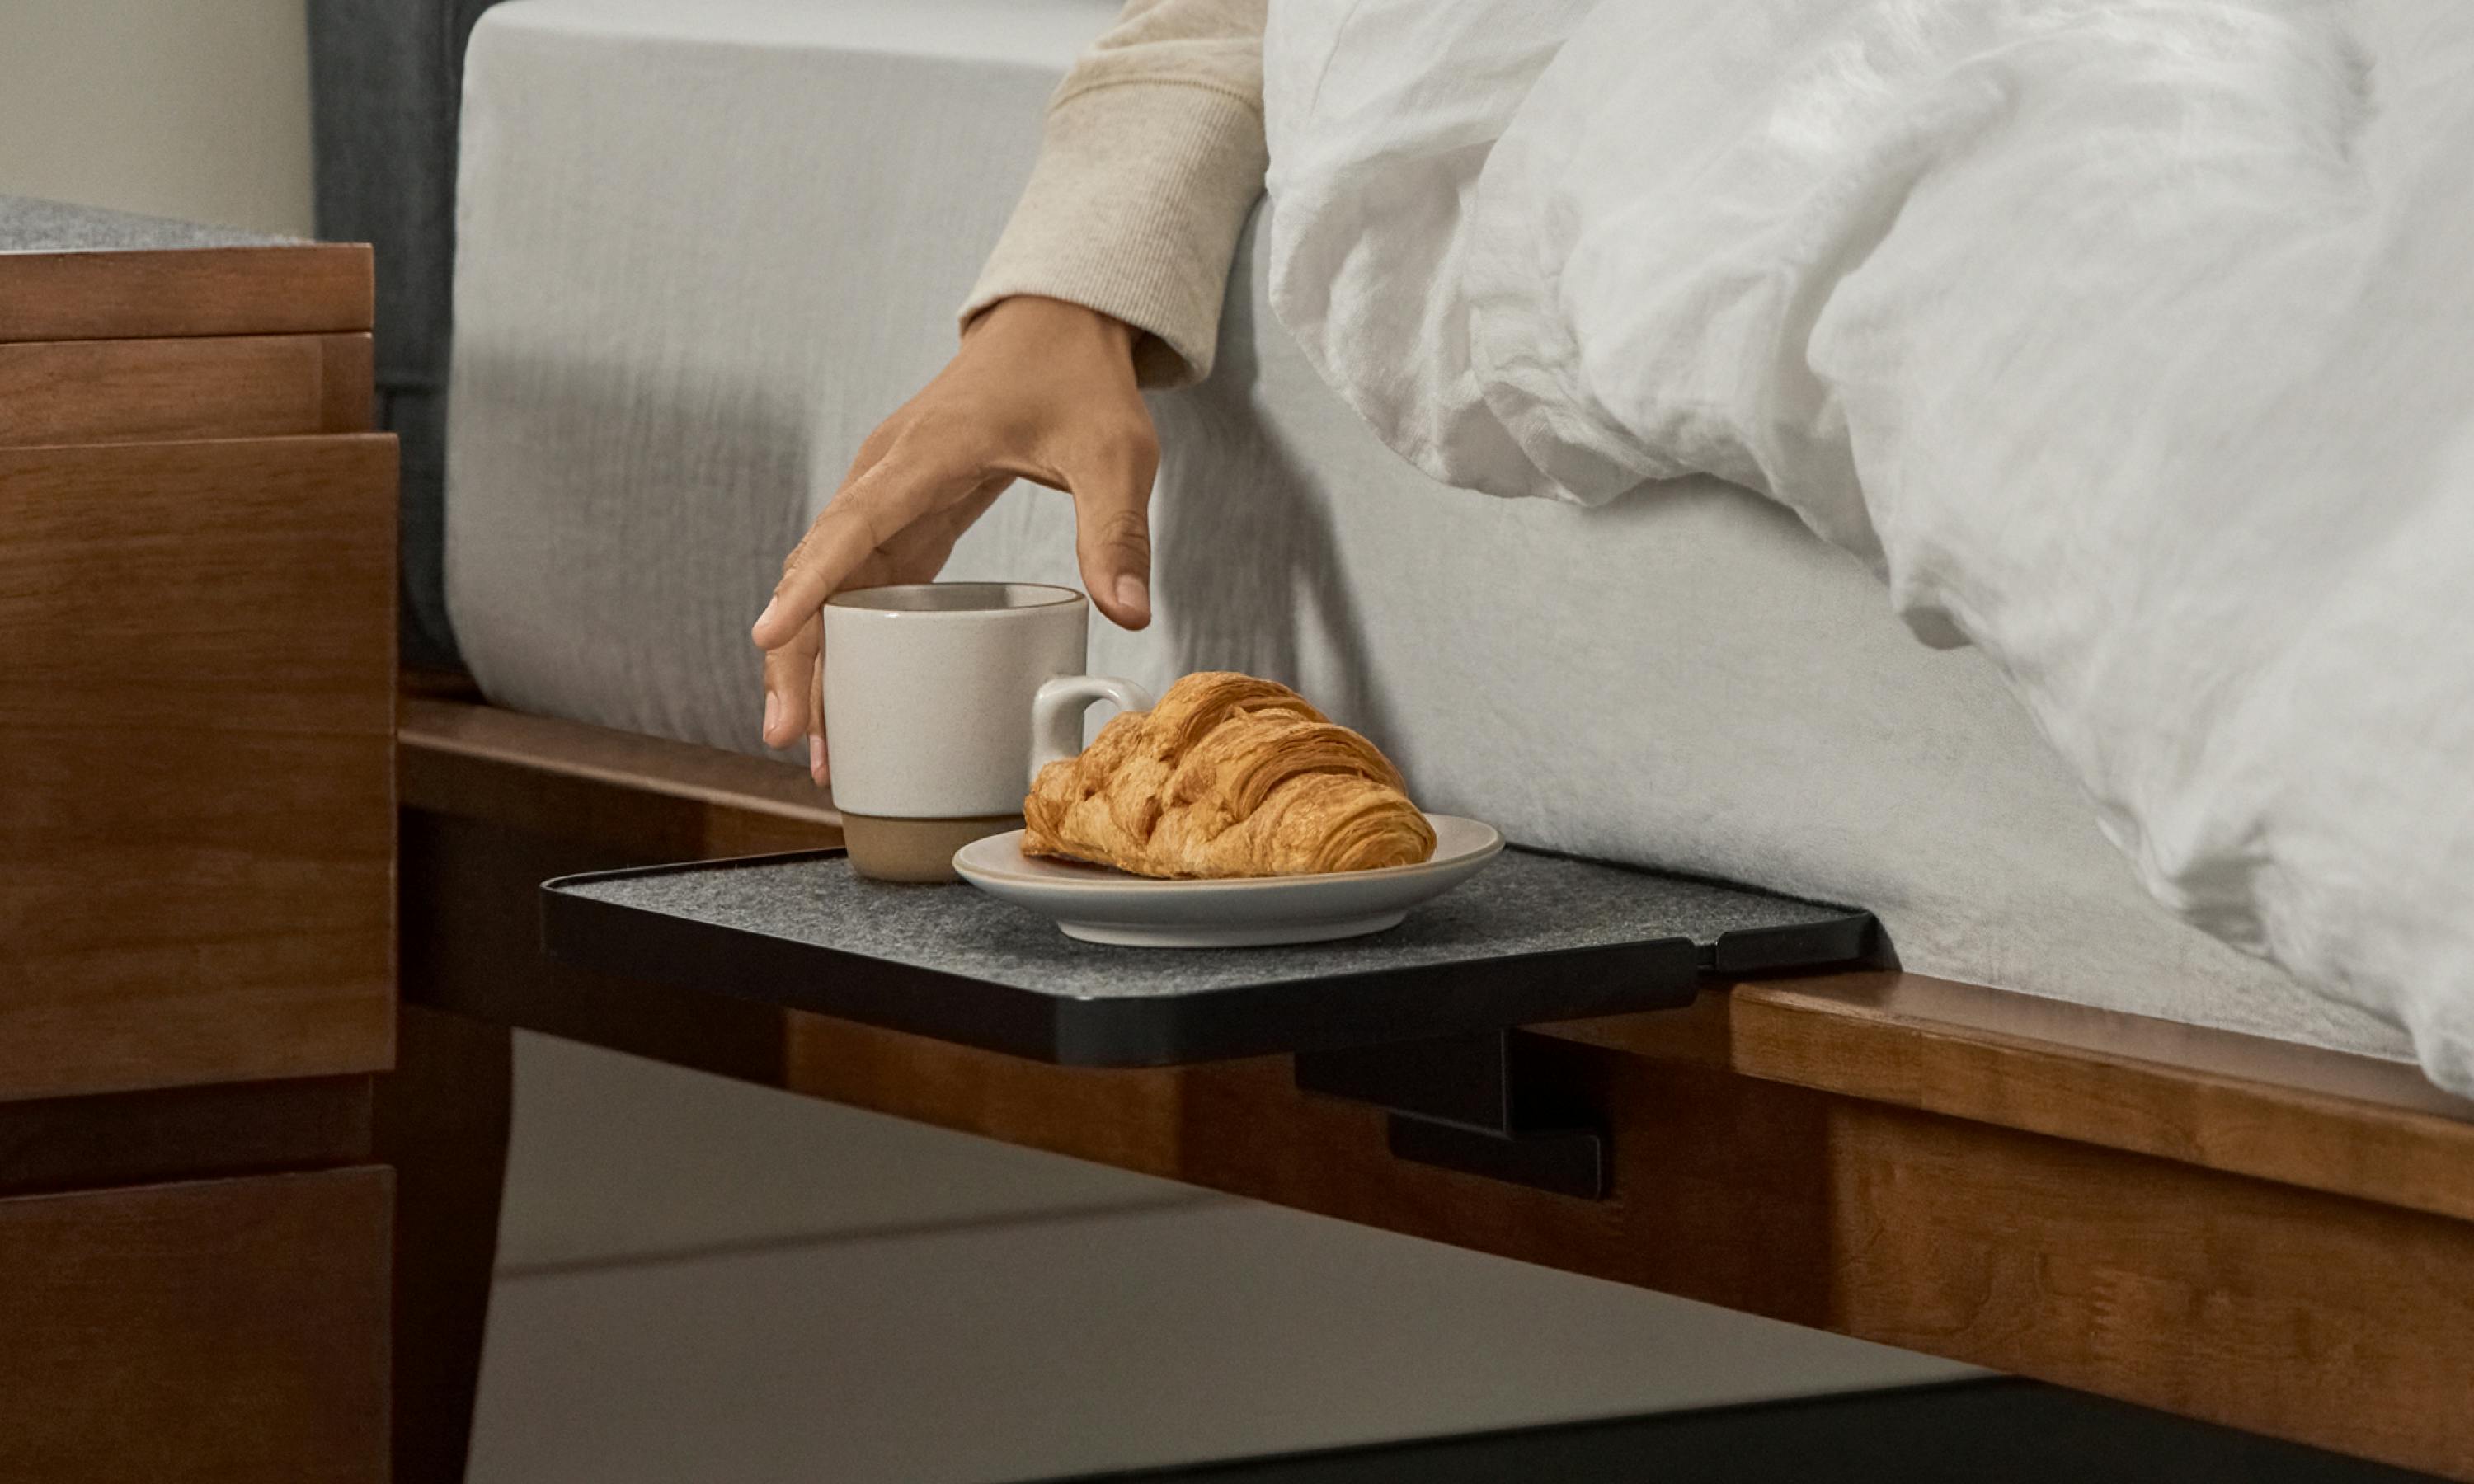 The Tray, in Matte Black (Defining Details)